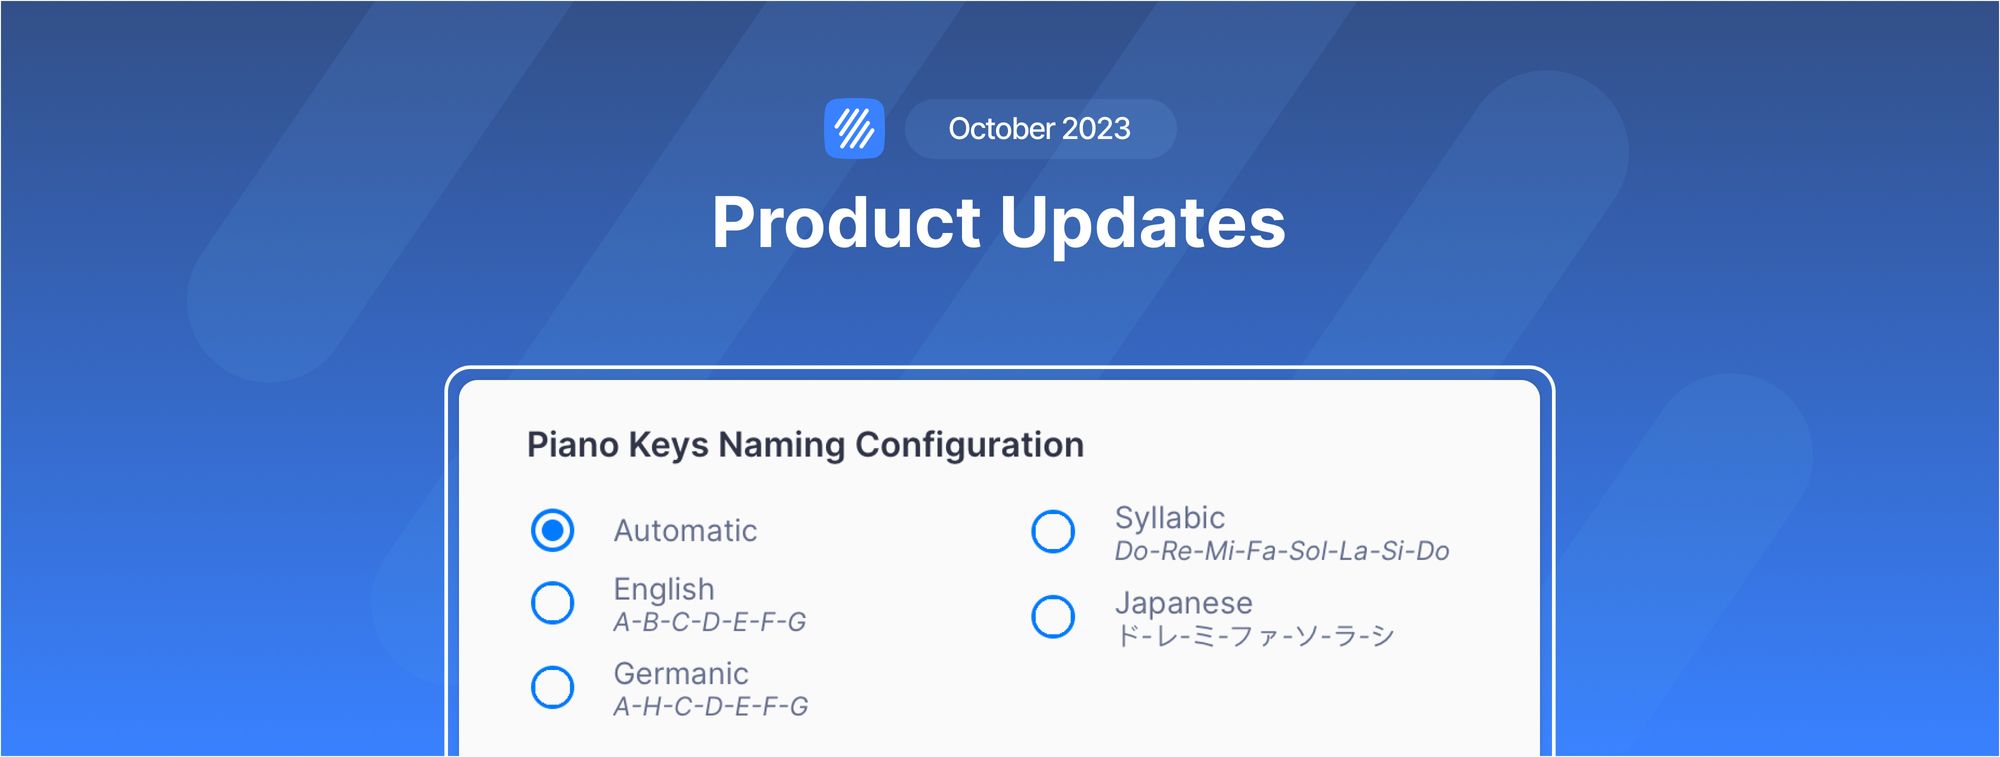 Flat updates, October 2023: Piano keys naming for mobile, Kodály notation, Delete comments, and more!